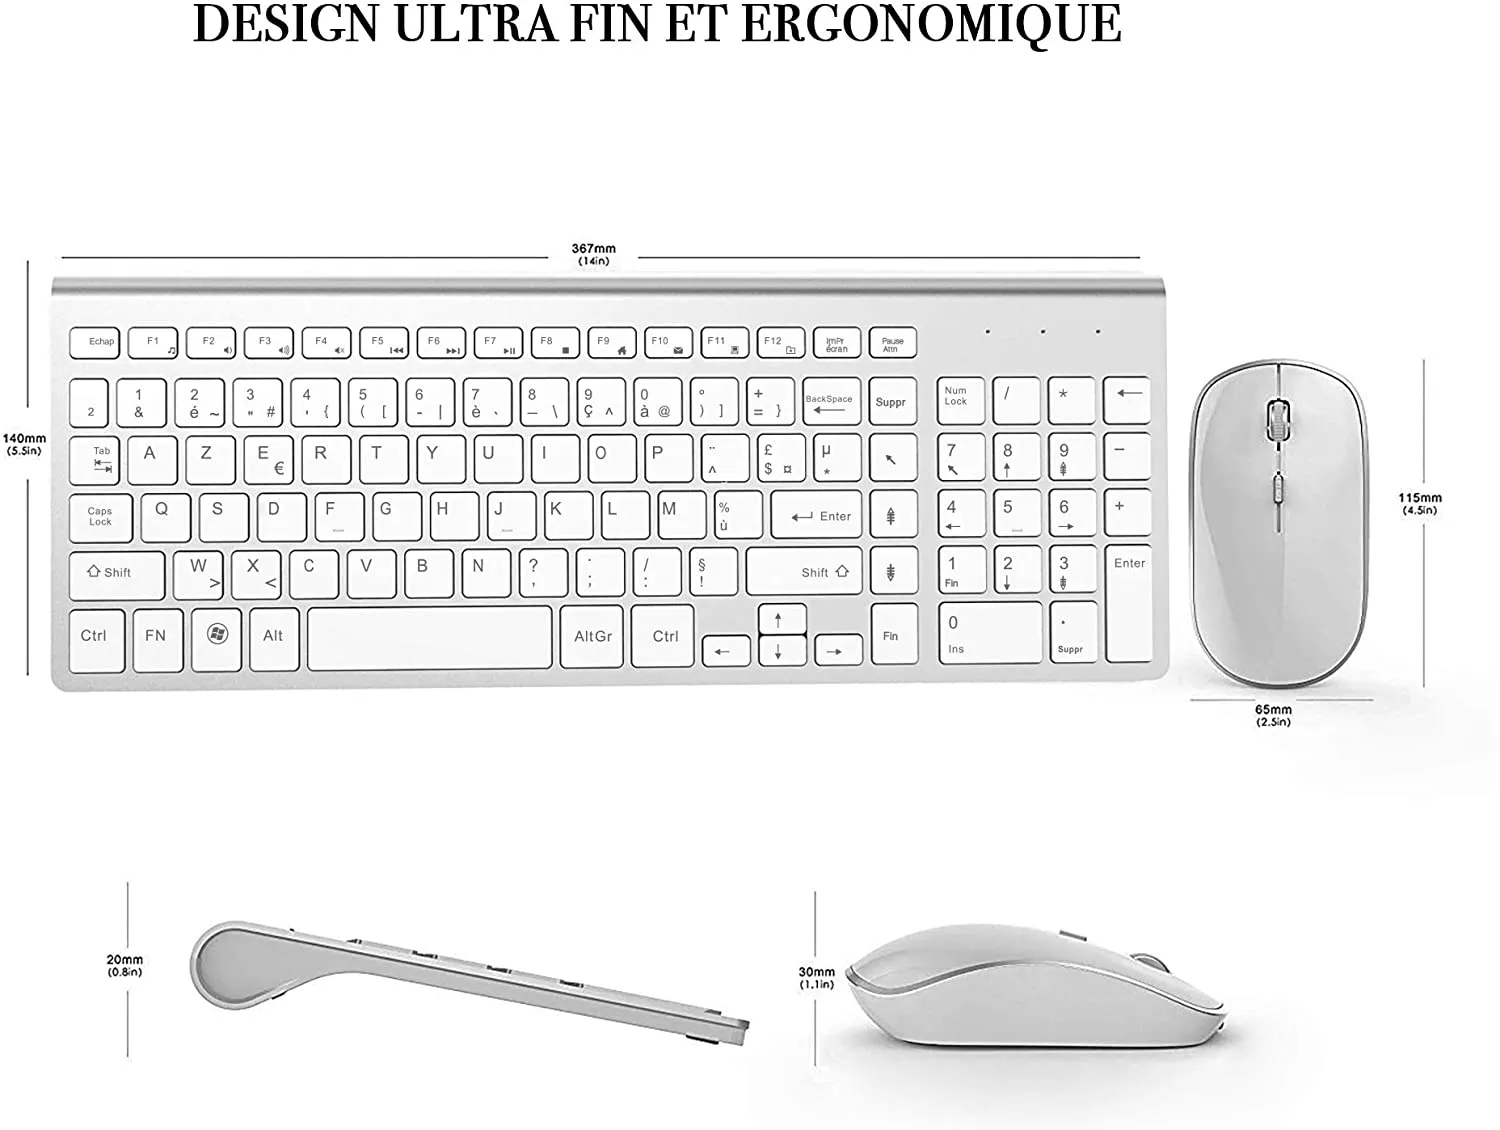 Hcdbfce50523e4ce682599cd091dd86a51 French 2.4G Wireless Keyboard Mouse Compatible with iMac PC Laptop Tablet Computer Windows (Silver White)